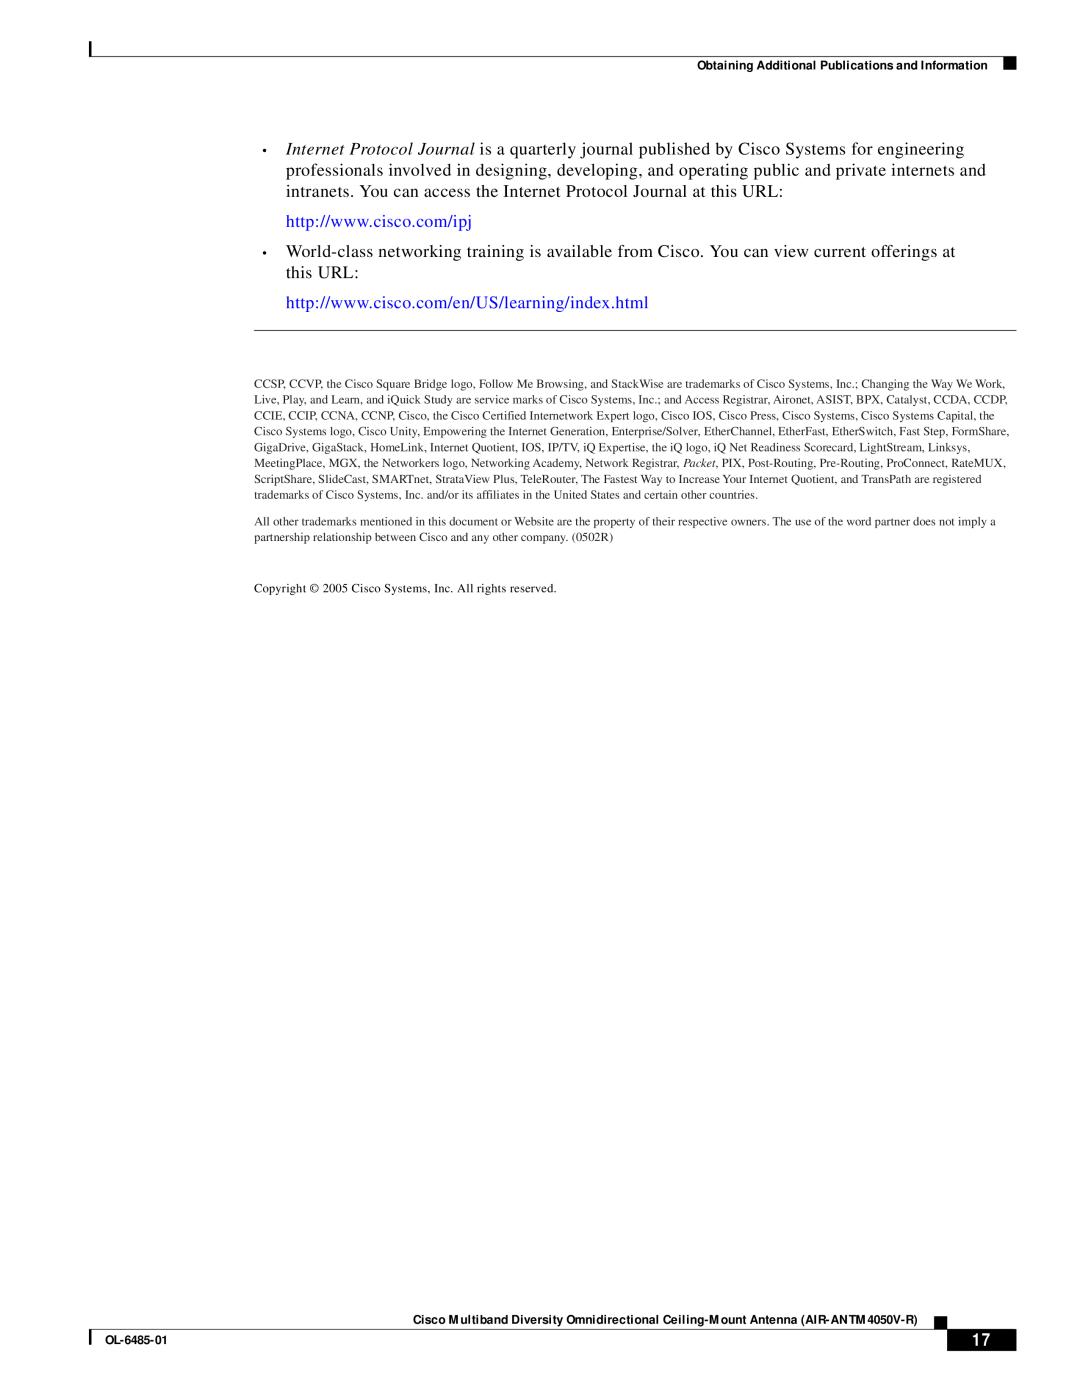 Cisco Systems AIR-ANTM4050V-R warranty Copyright 2005 Cisco Systems, Inc. All rights reserved 